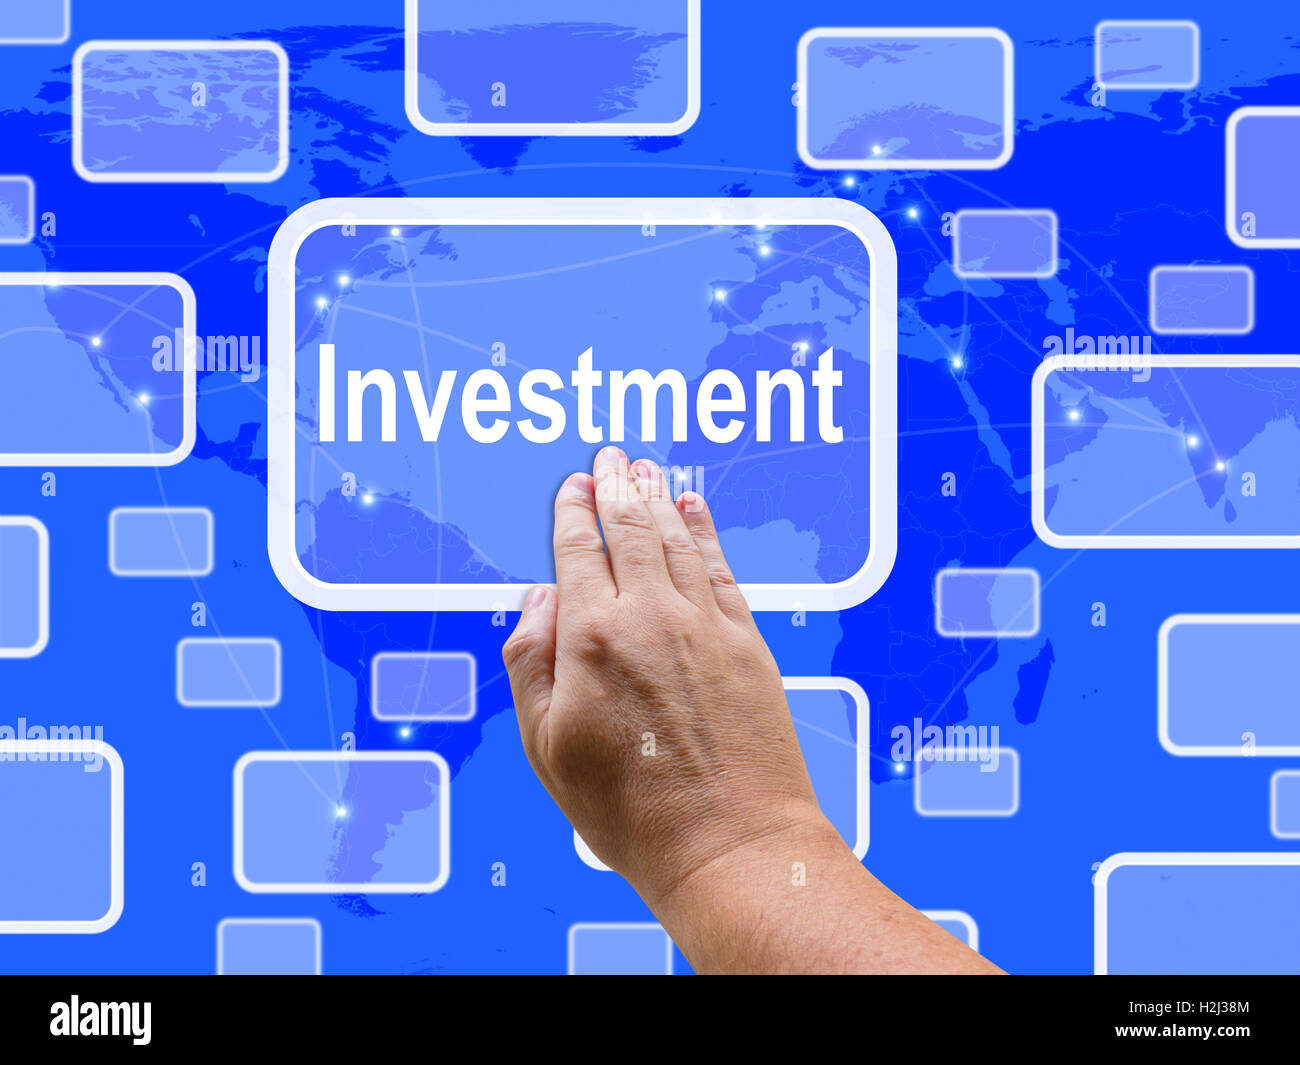 Investment Touch Screen Shows Lending Money Stock Photo